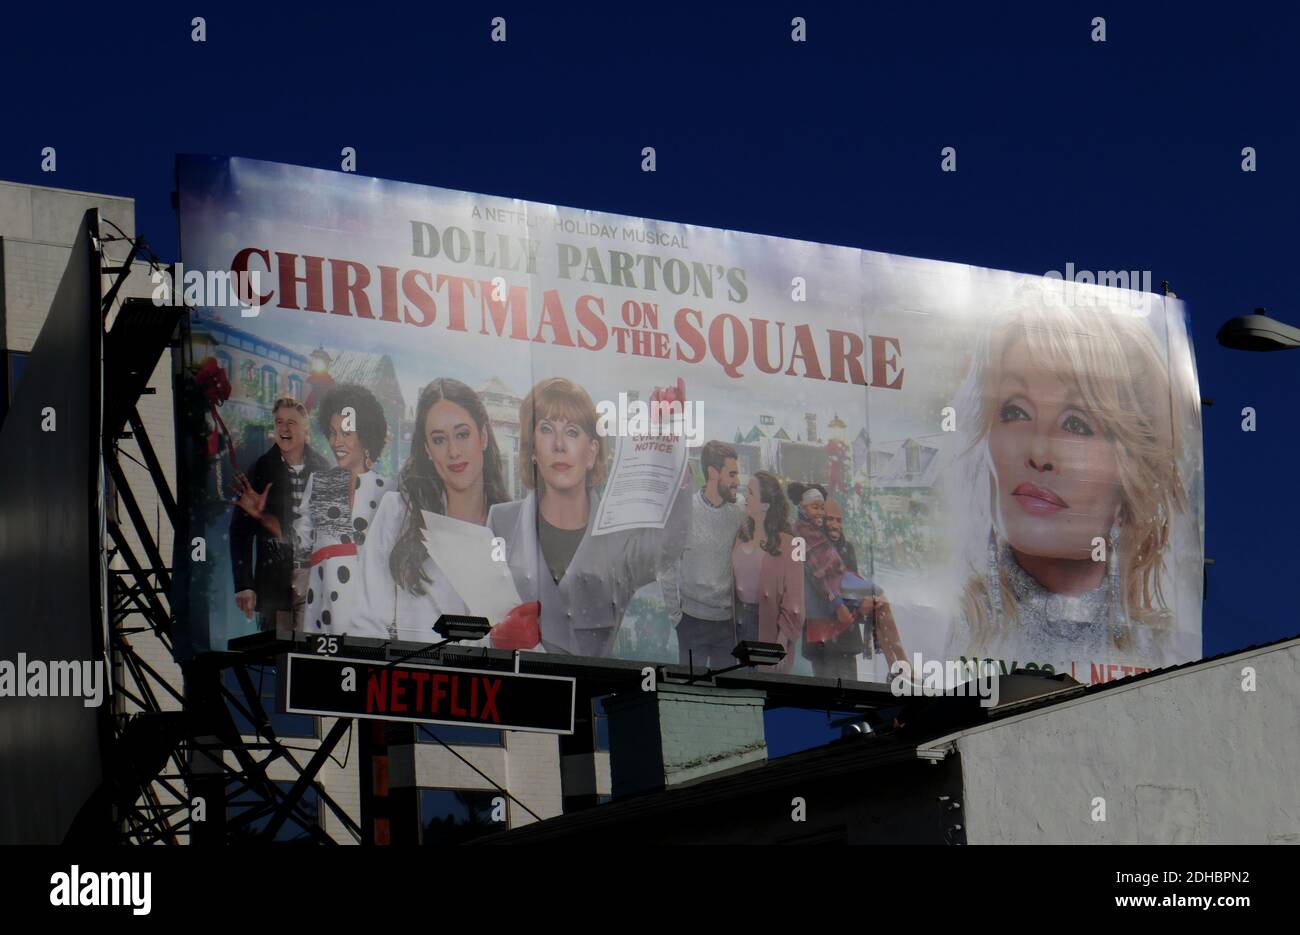 West Hollywood, California, USA 3rd December 2020 A general view of atmosphere of Dolly Parton Christmas on the Square Billboard on Sunset Blvd on December 3, 2020 in West Hollywood, California, USA. Photo by Barry King/Alamy Stock Photo Stock Photo